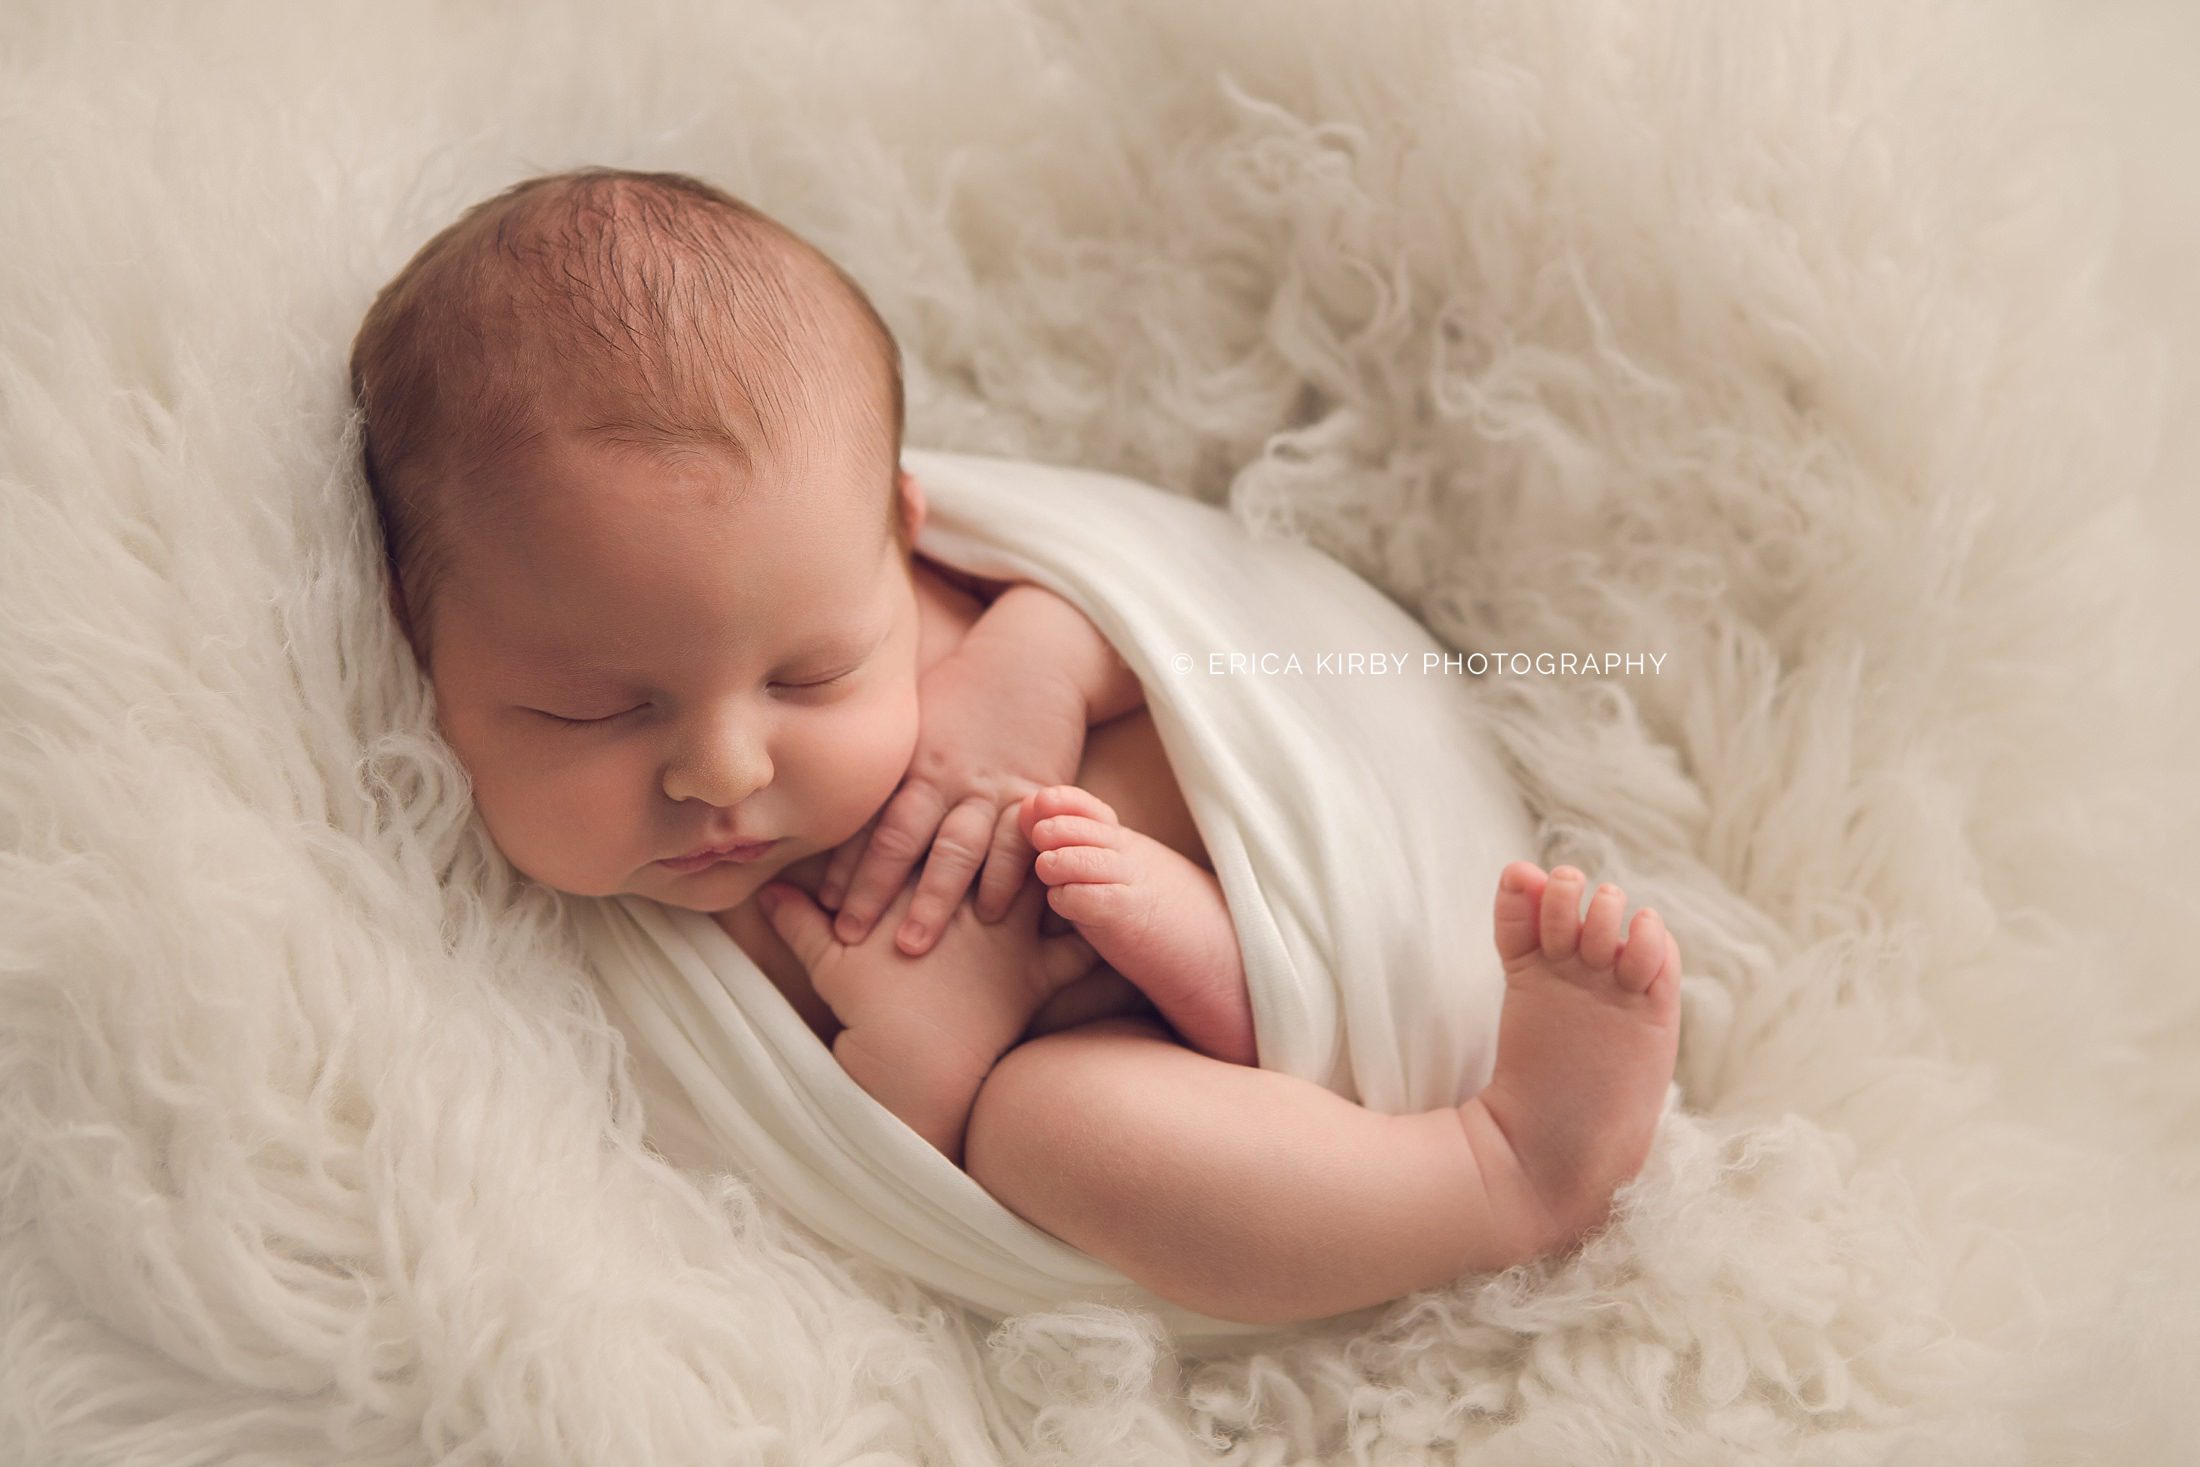 Rogers AR Newborn Baby Photographer | baby boy newborn photo session in northwest arkansas light and airy neutral colors | Erica Kirby Photography